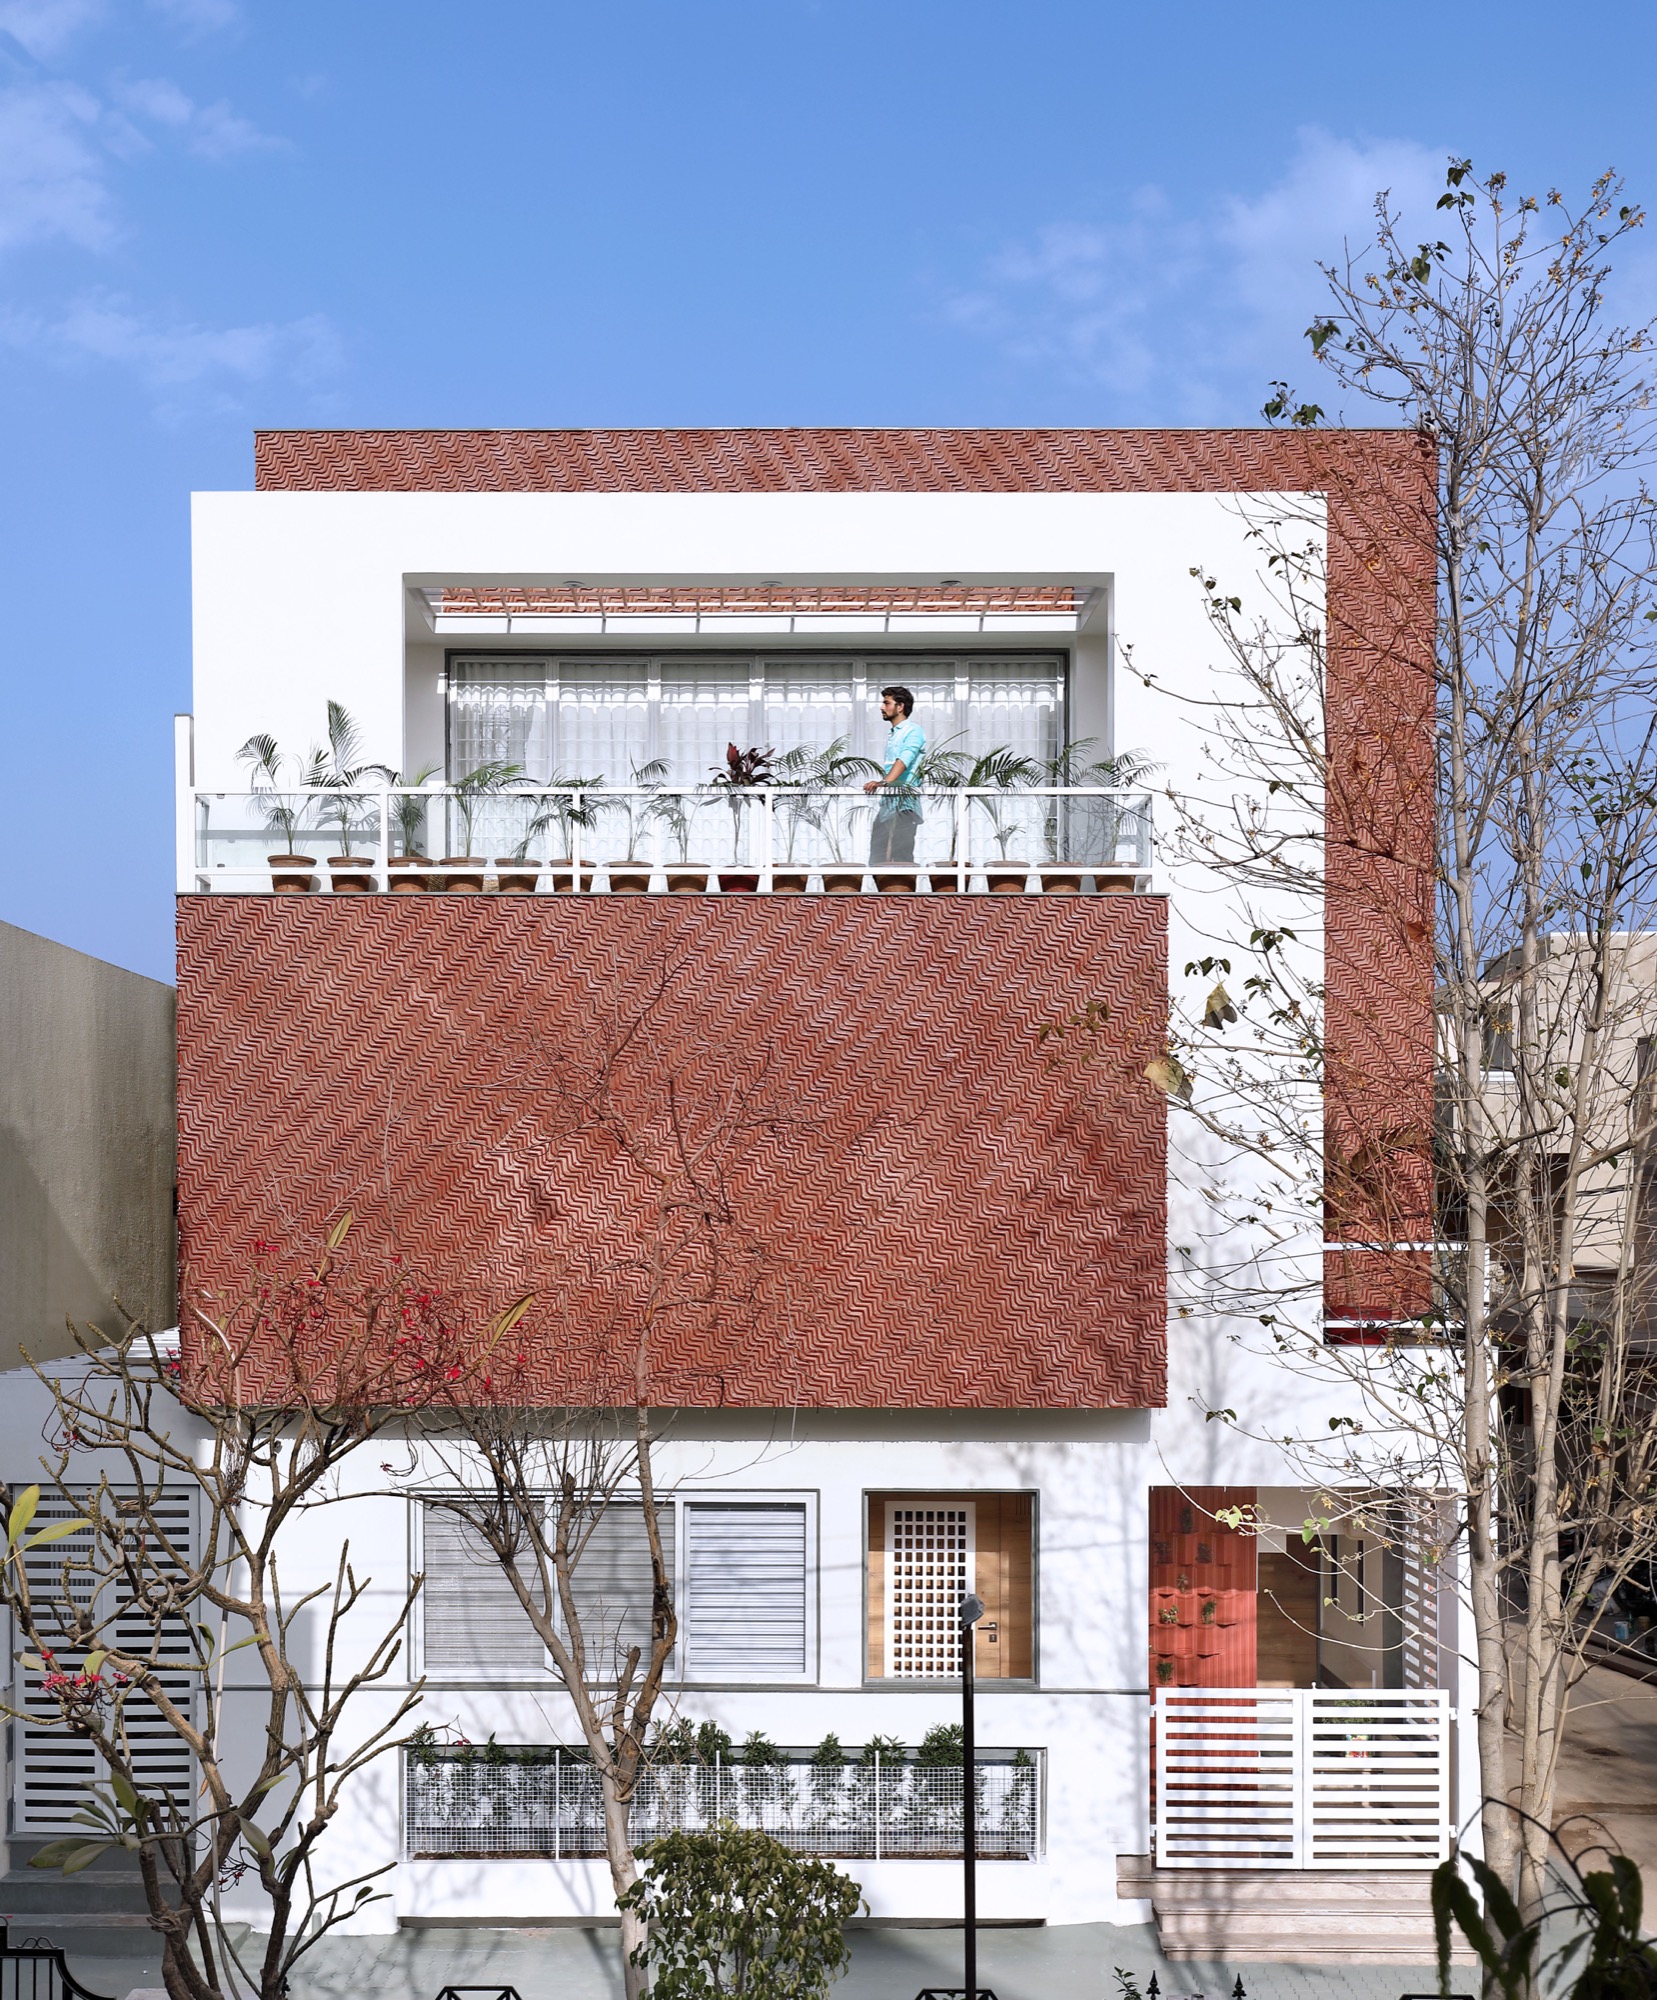 Manoj Patel Design Studio creates an innovative earthy red colored clay tile cladding facade for a refurbished residence in Vadodara 1